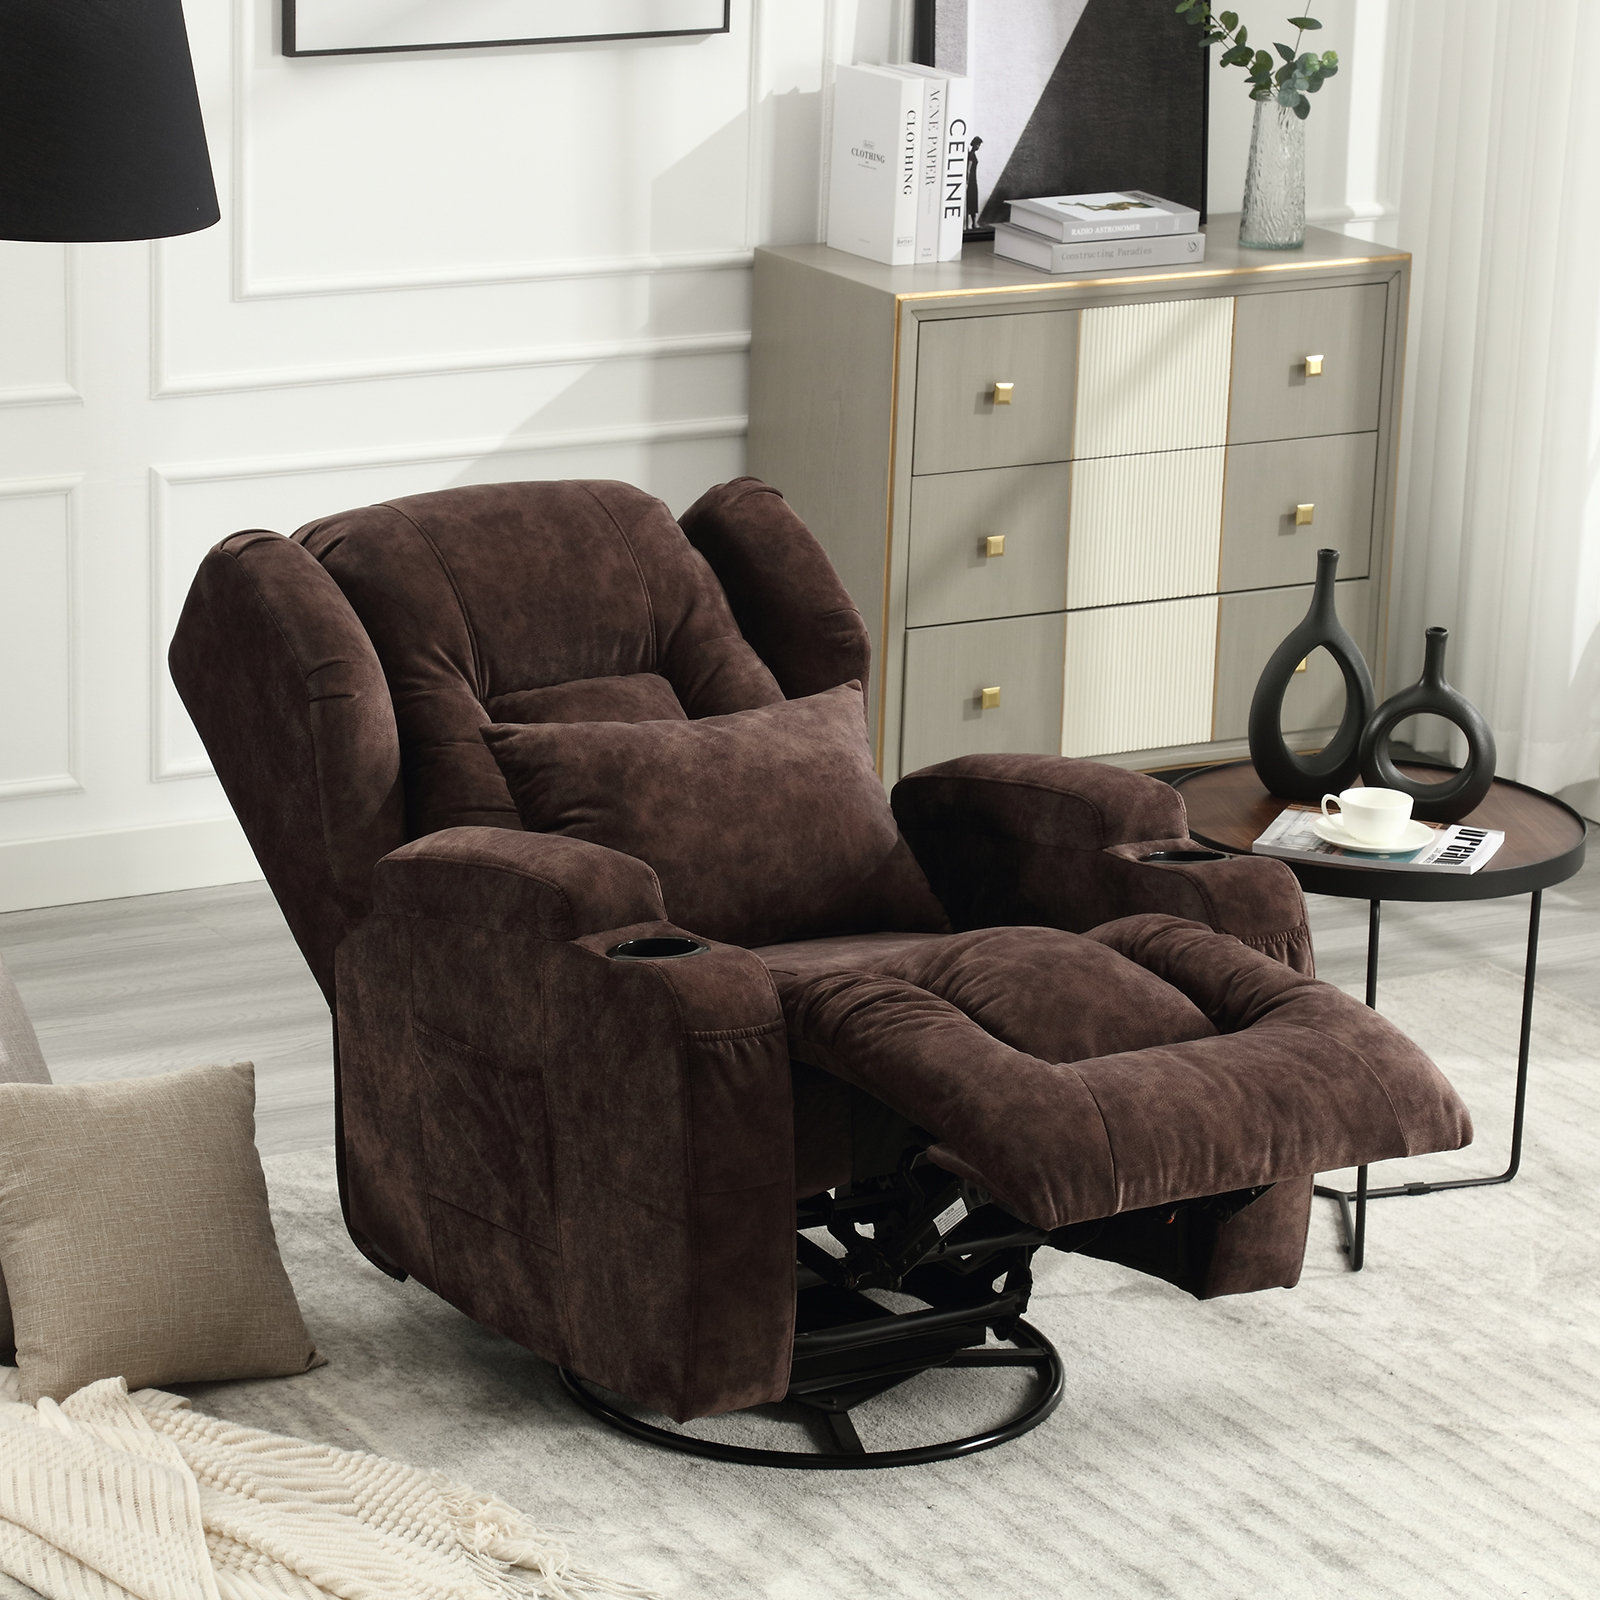 Fabric Recliner Chair, Adjustable Home Theater Single Recliner with Padded Seat  Cushion and Backrest, 3 Adjustable Positions Manual Rocker Recliner Sofa  Chair,Rocking Sofa for Living Room 